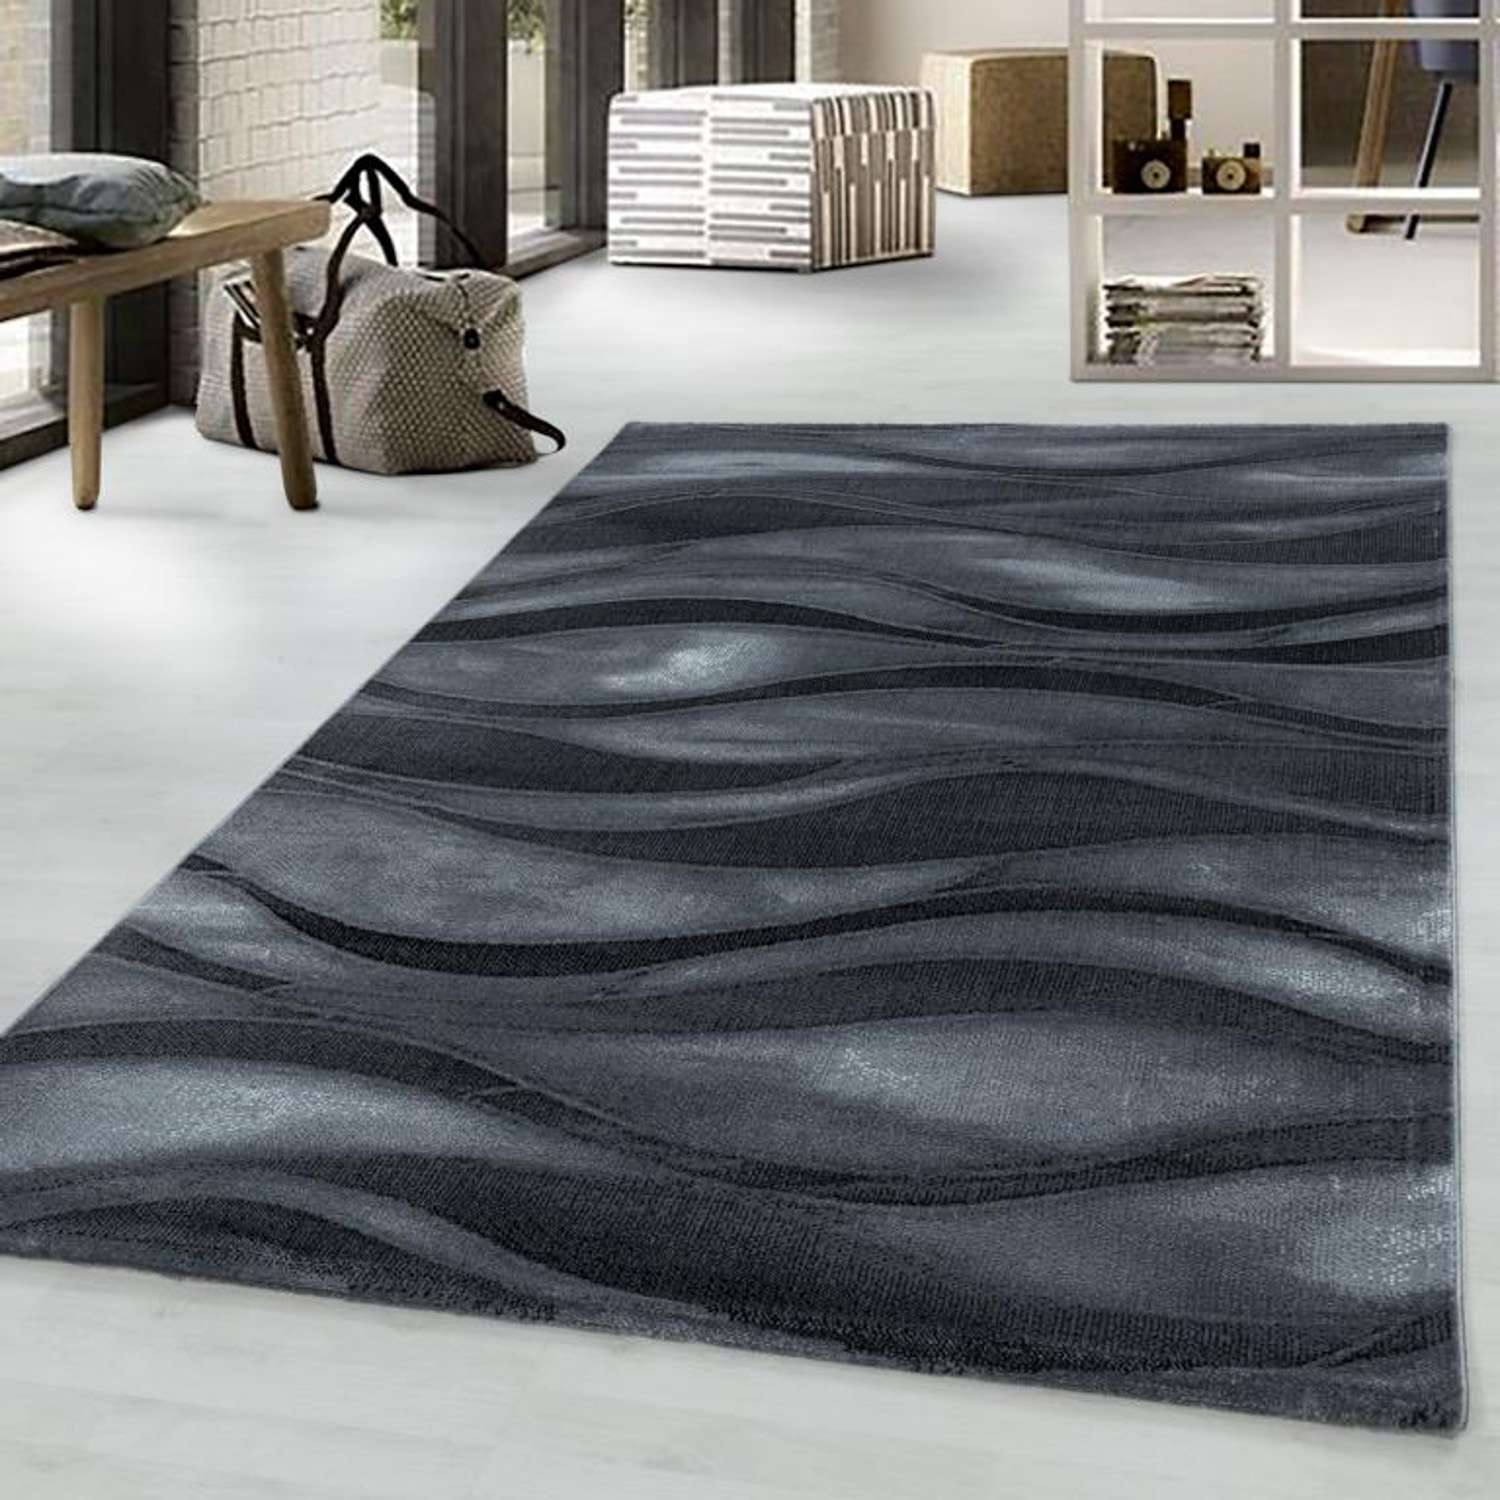 Low-Pile Rug - Carmelo - rectangle